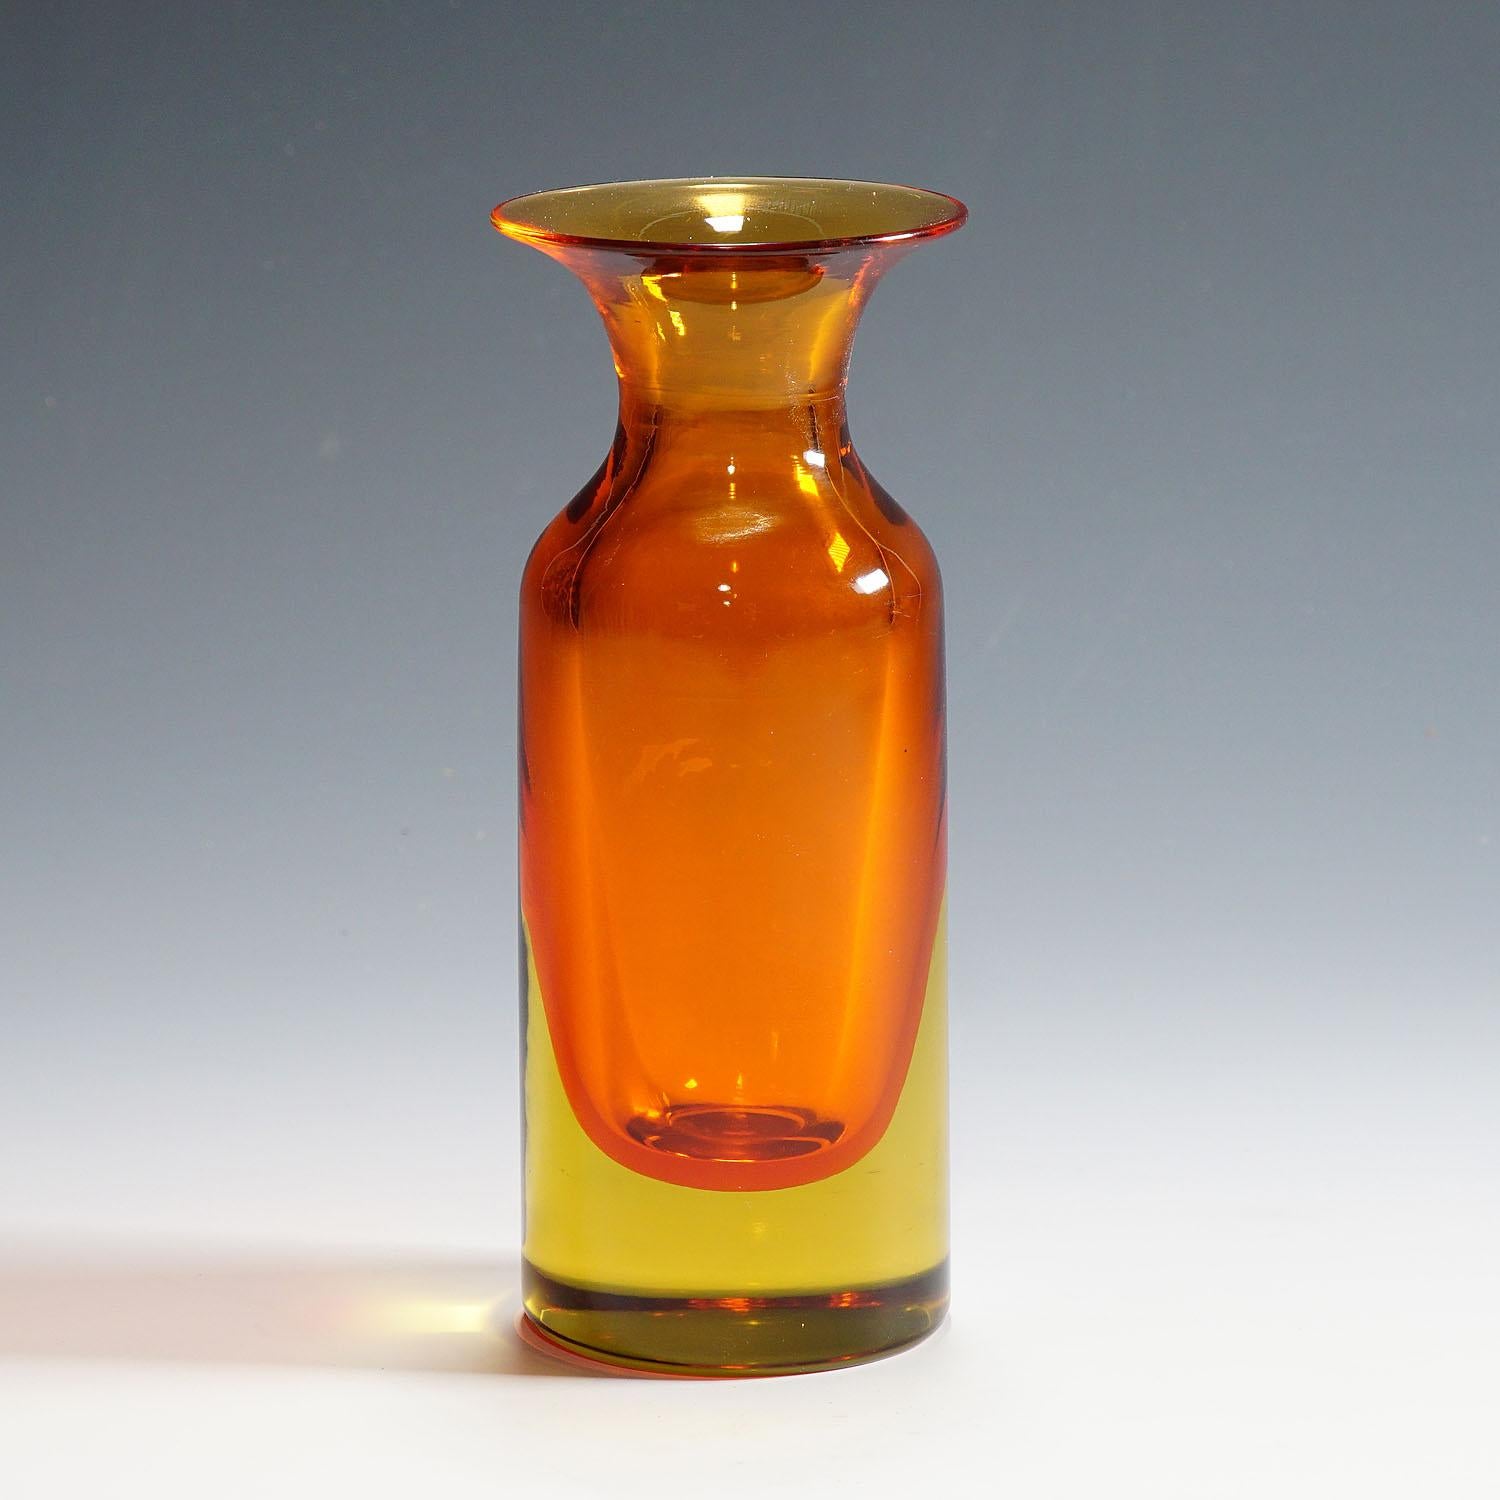 A Mid-Century Modern sommerso art glass vase designed by Antonio Da Ros for Vetreria Gino Cenedese and hand-blown in Murano, Italy circa 1960s.This authentic vintage Italian art glass vase features a dynamic sculptural silhouette in a vibrant